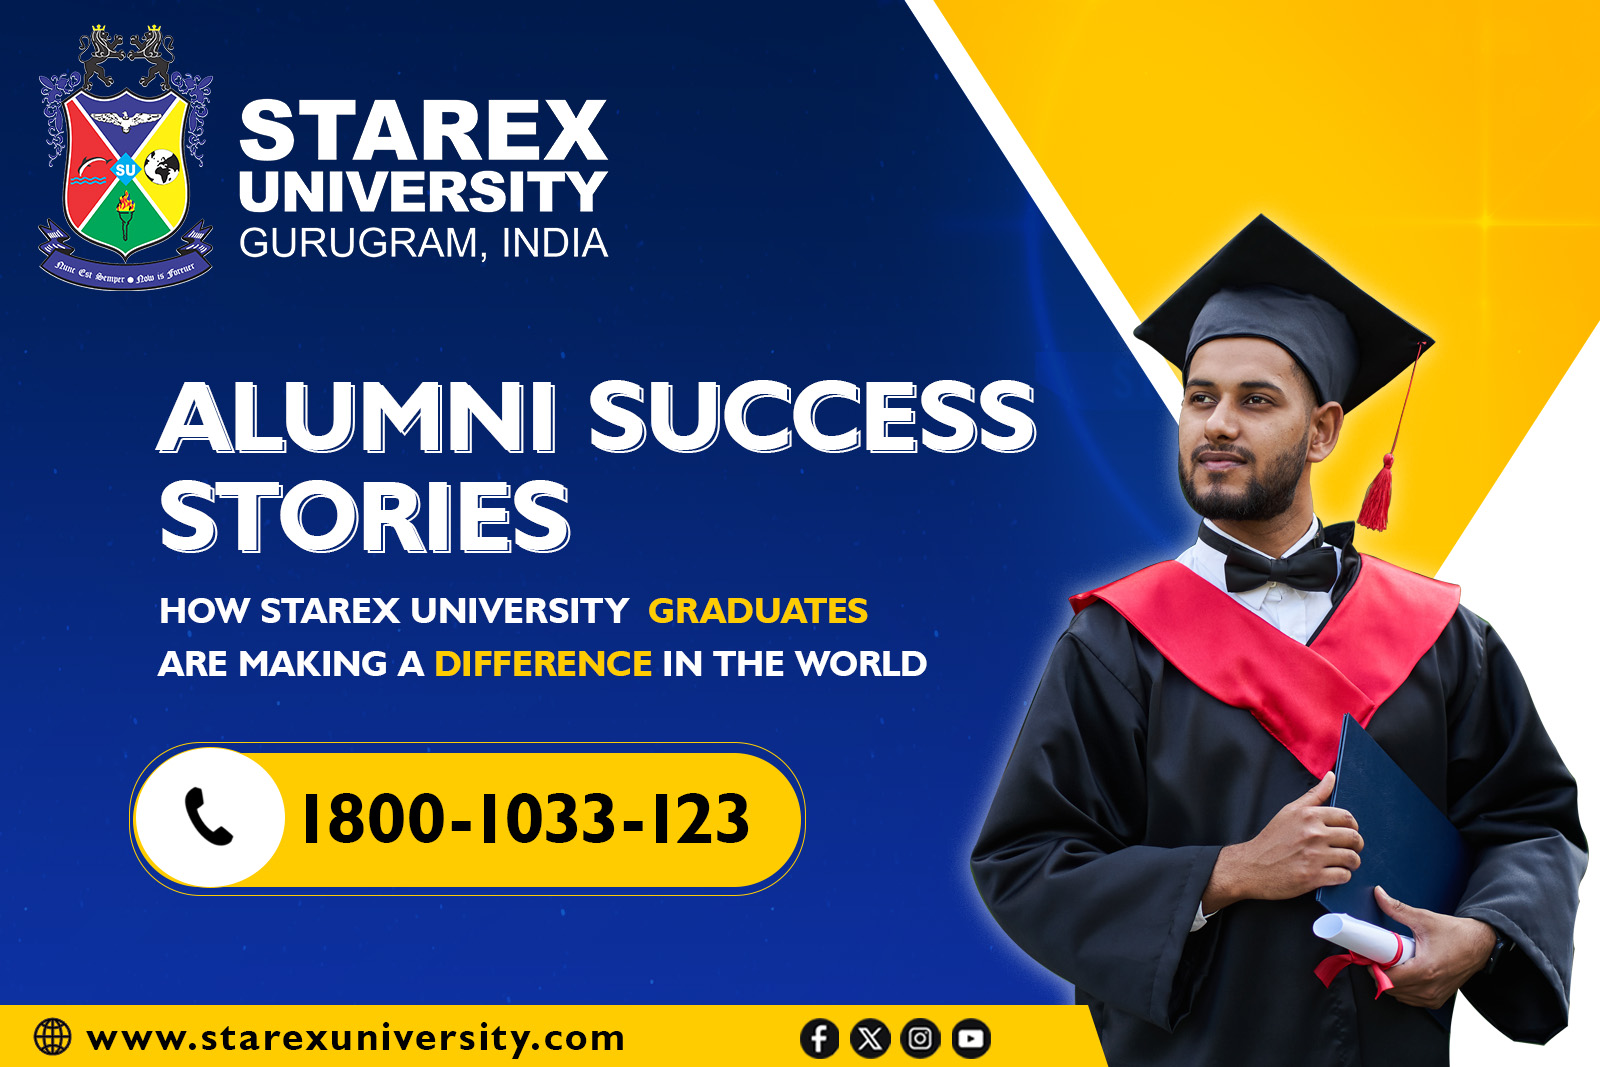 Alumni Success Stories: How Starex University Graduates Are Making a Difference in the World